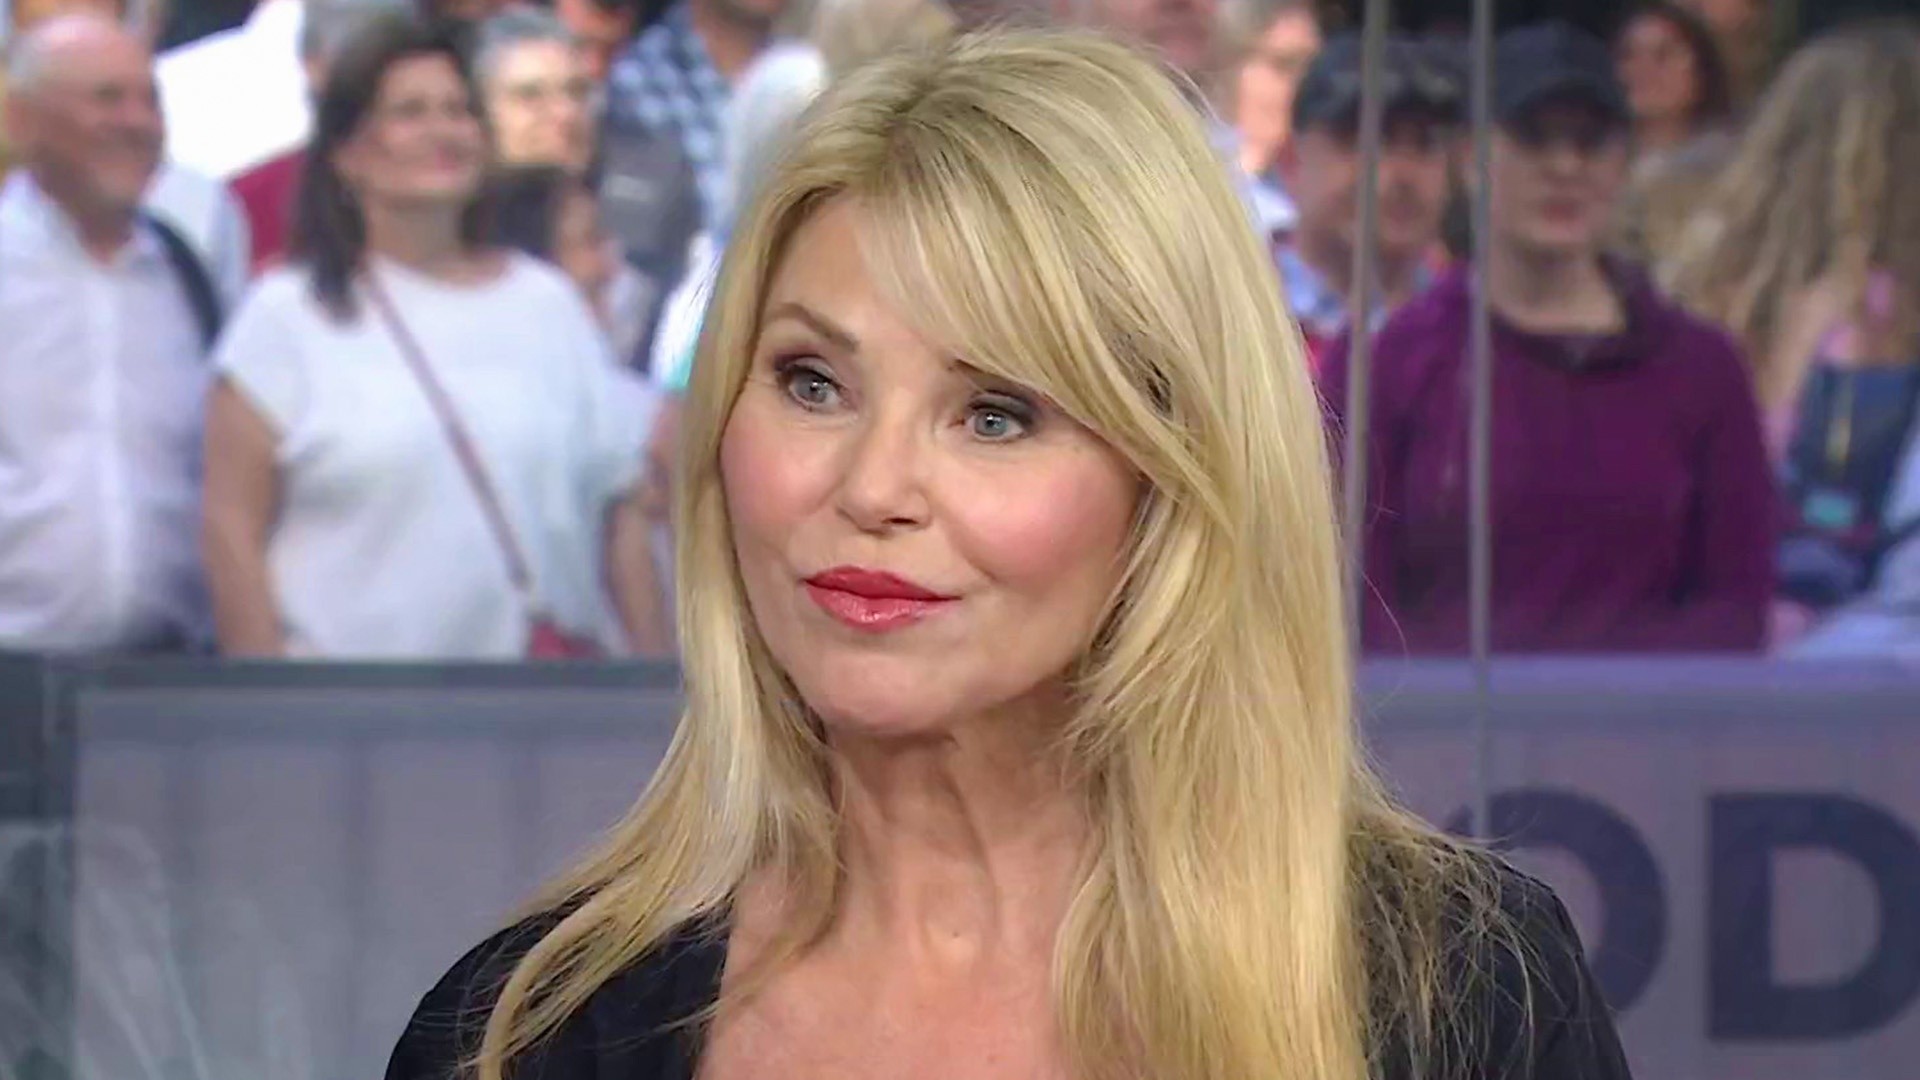 Christie Brinkley opens up about skin cancer diagnosis on TODAY